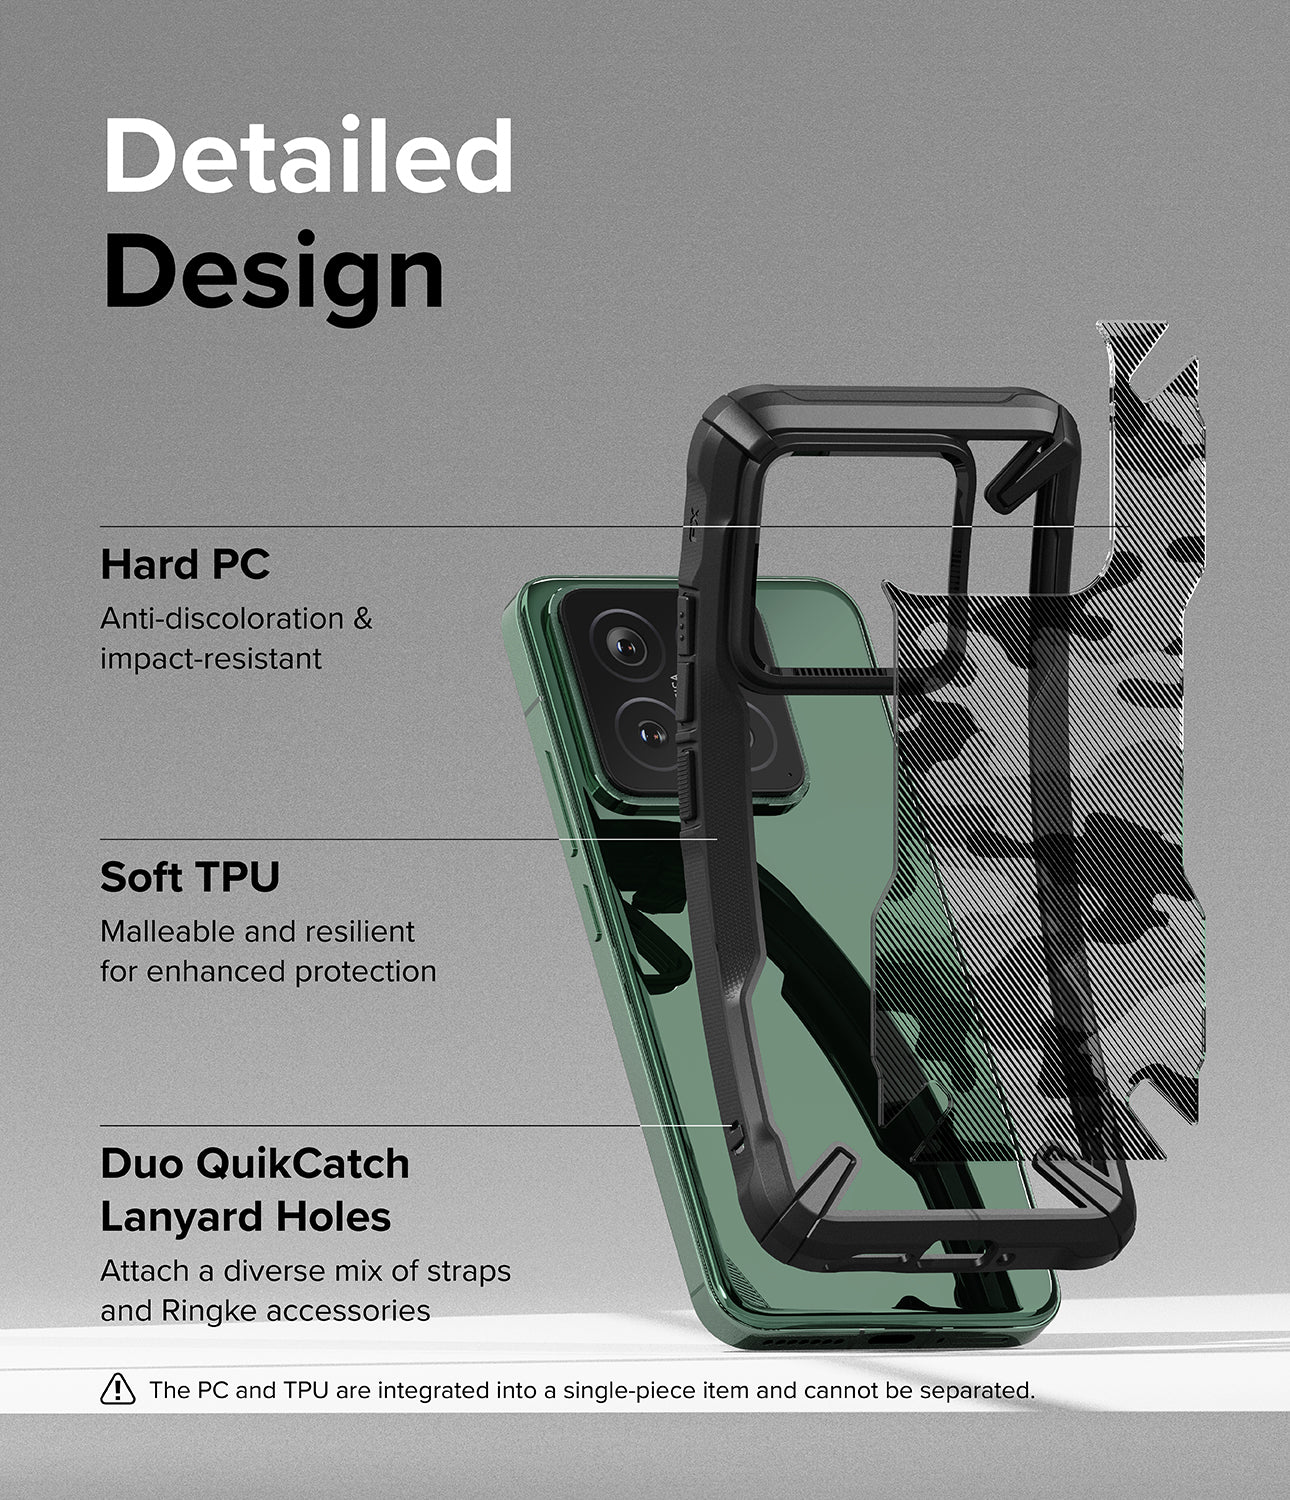 Xiaomi 14 Case | Fusion-X - Camo Black - Detailed Design. Anti-discoloration and impact-resistant with Hard PC. Malleable and resilient for enhanced protection with Soft TPU. Attach a diverse mix of straps and Ringke accessories with Duo QuikCatch Lanyard Holes.